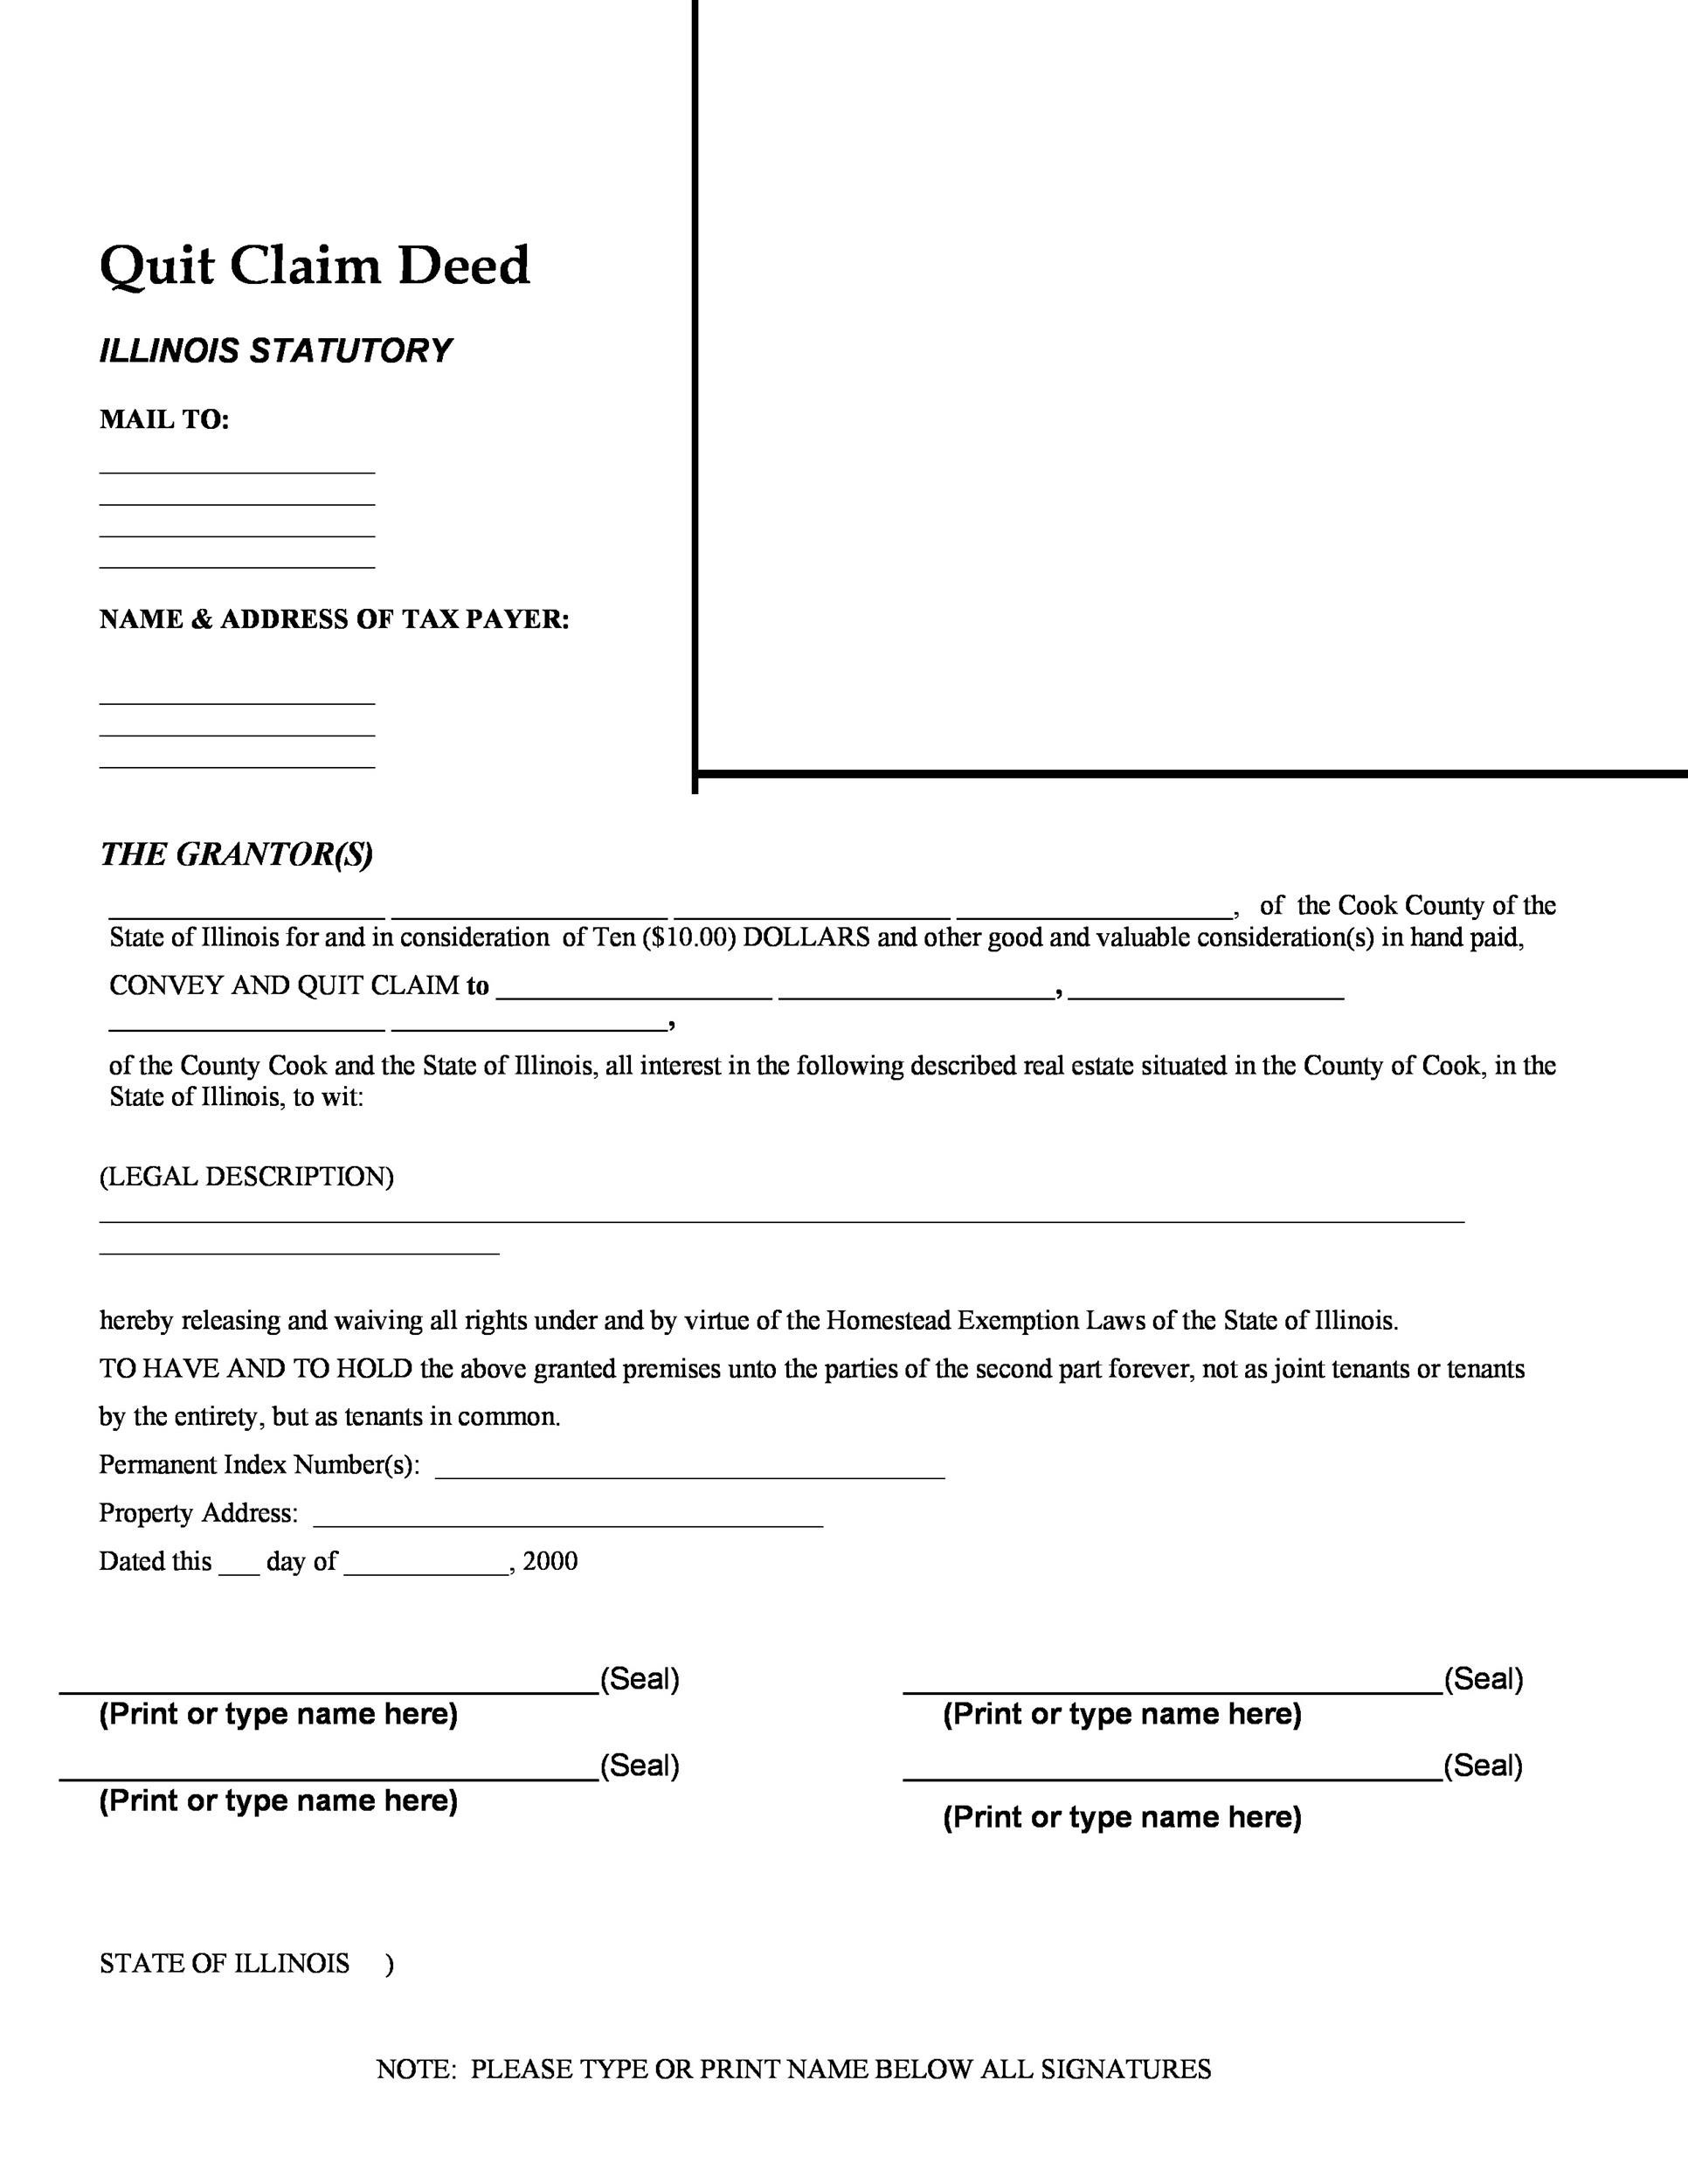 46 Free Quit Claim Deed Forms Amp Templates TemplateLab